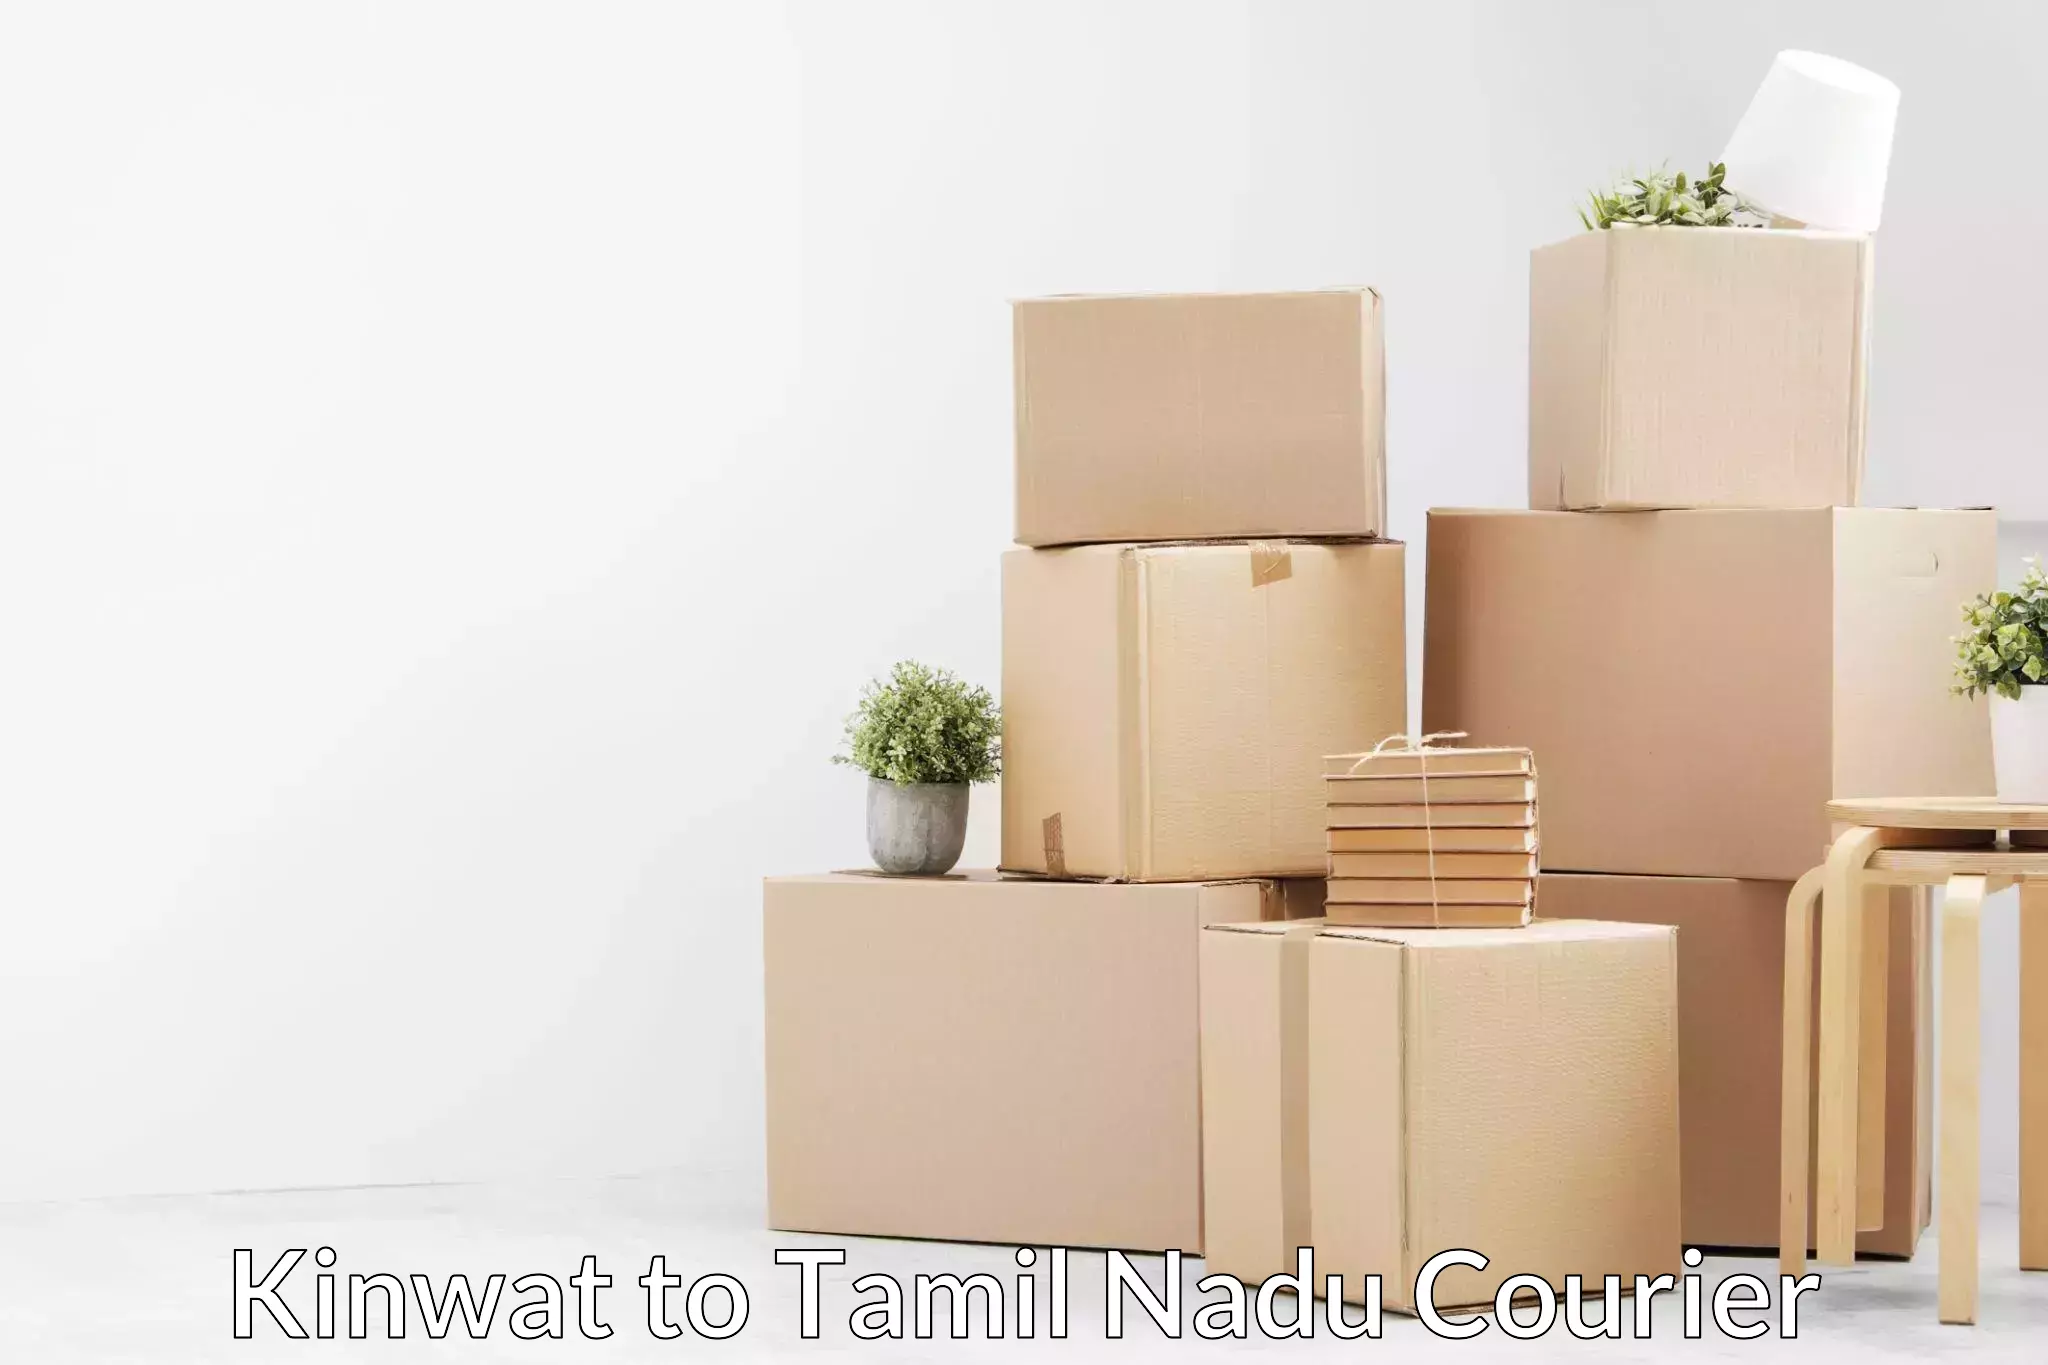 Quality relocation services in Kinwat to Tamil Nadu